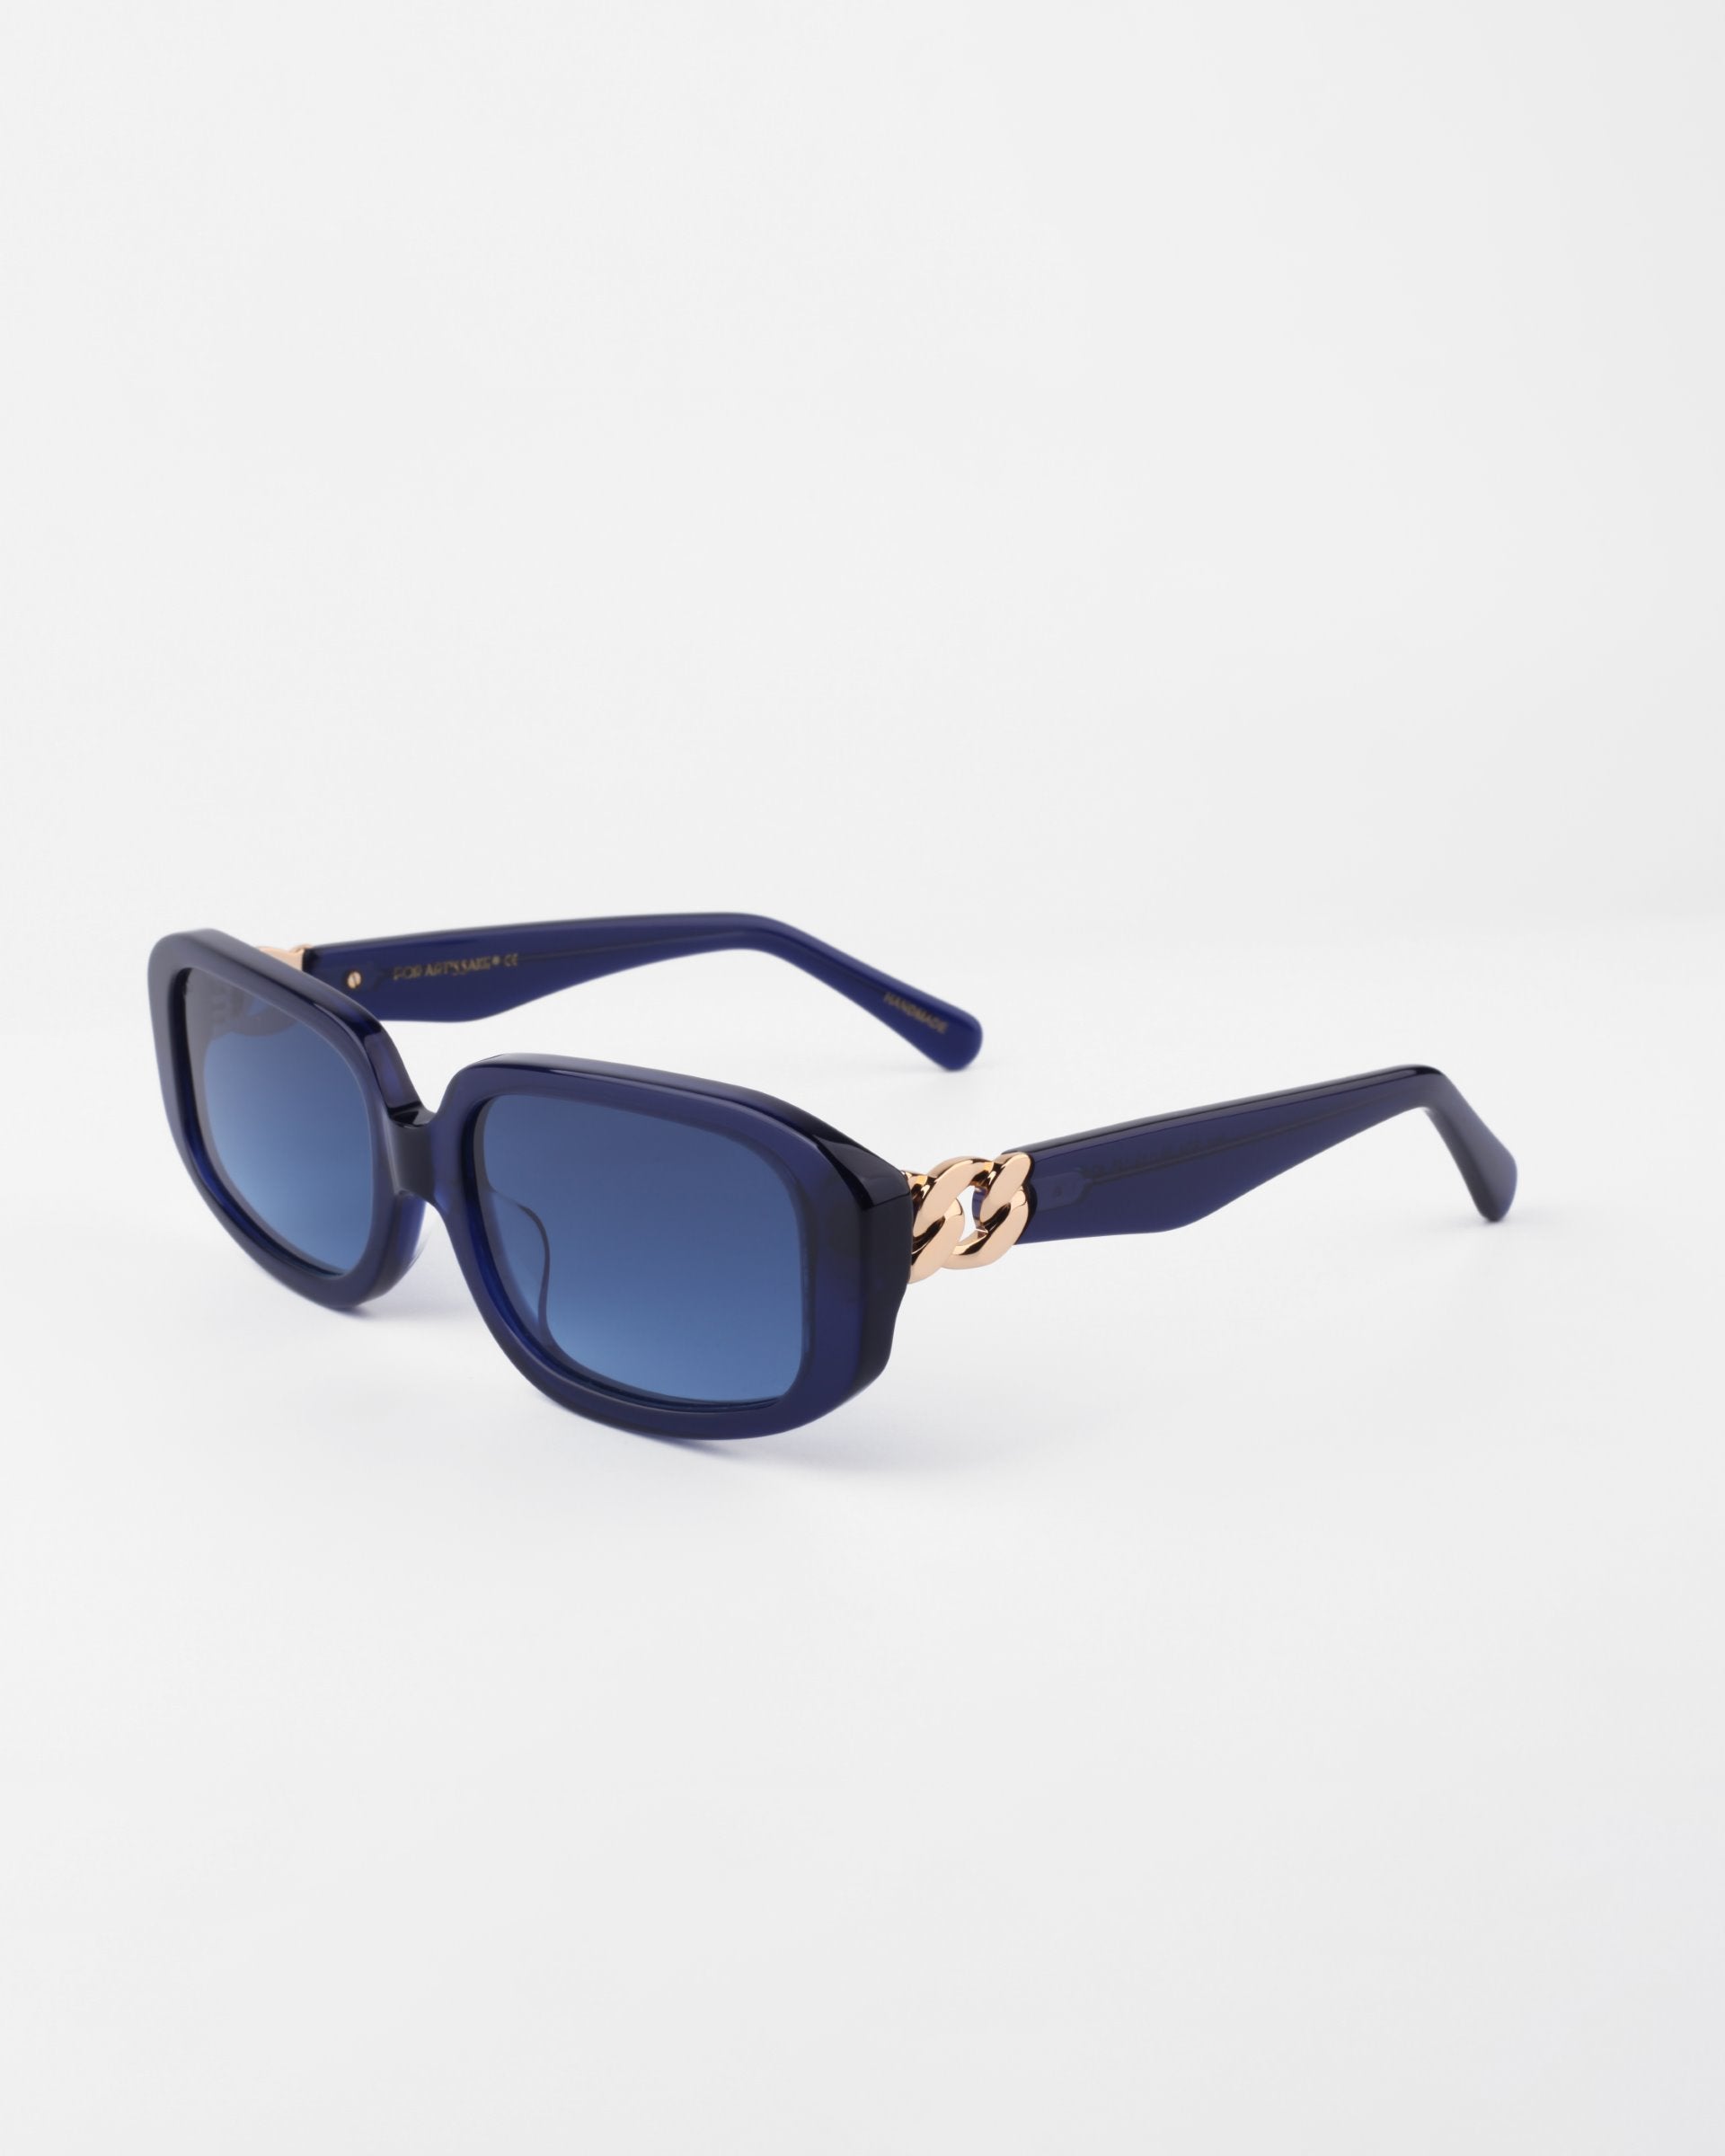 A pair of stylish navy blue For Art&#39;s Sake® Bolt sunglasses with square lenses and dark blue tinted, shatter-resistant nylon glasses. The thick handmade acetate frame features gold-plated temple detailing near the hinges. The background is plain white.